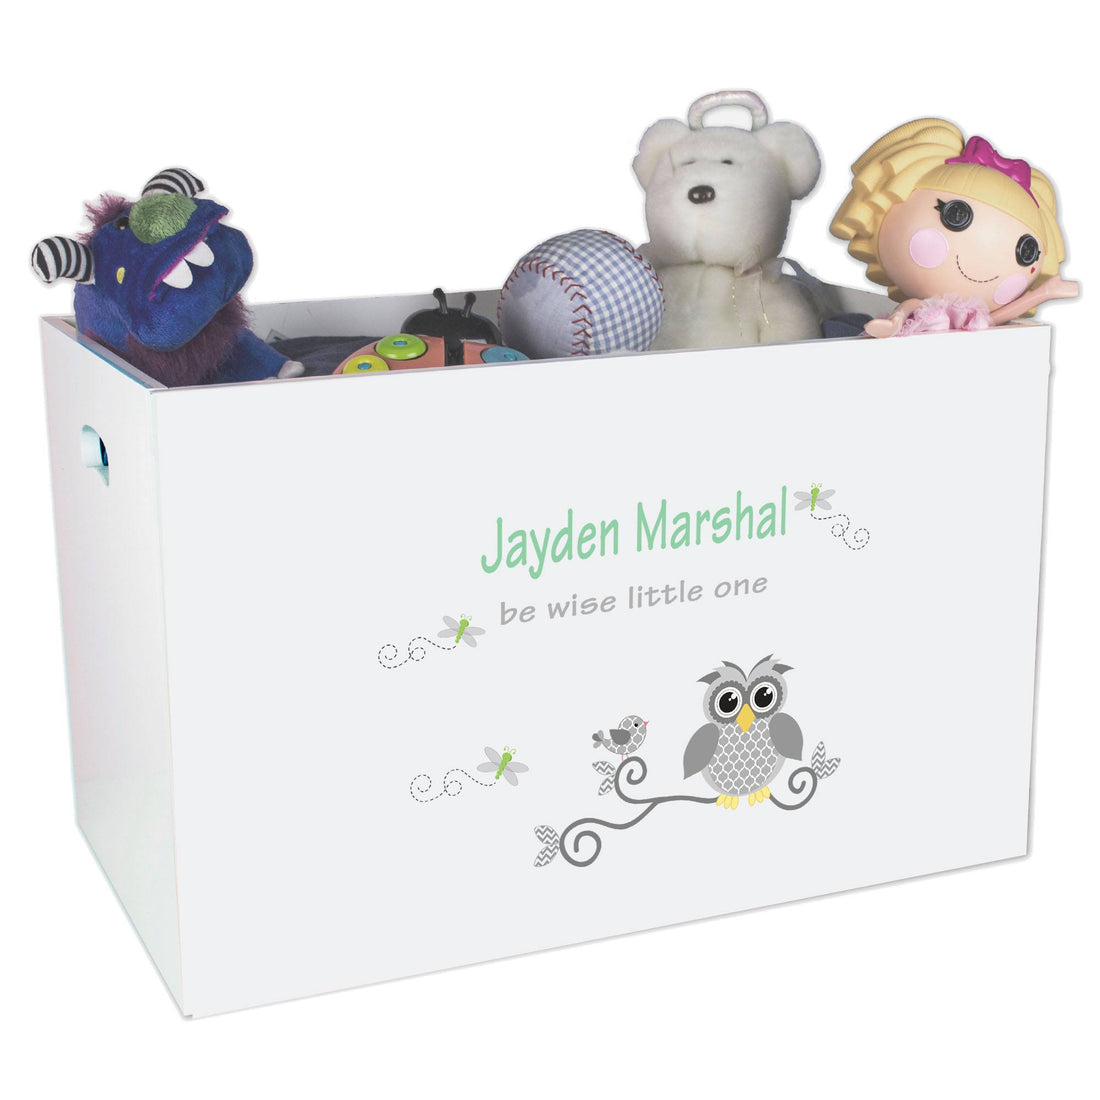 Open White Toy Box Bench with Gray Owl design